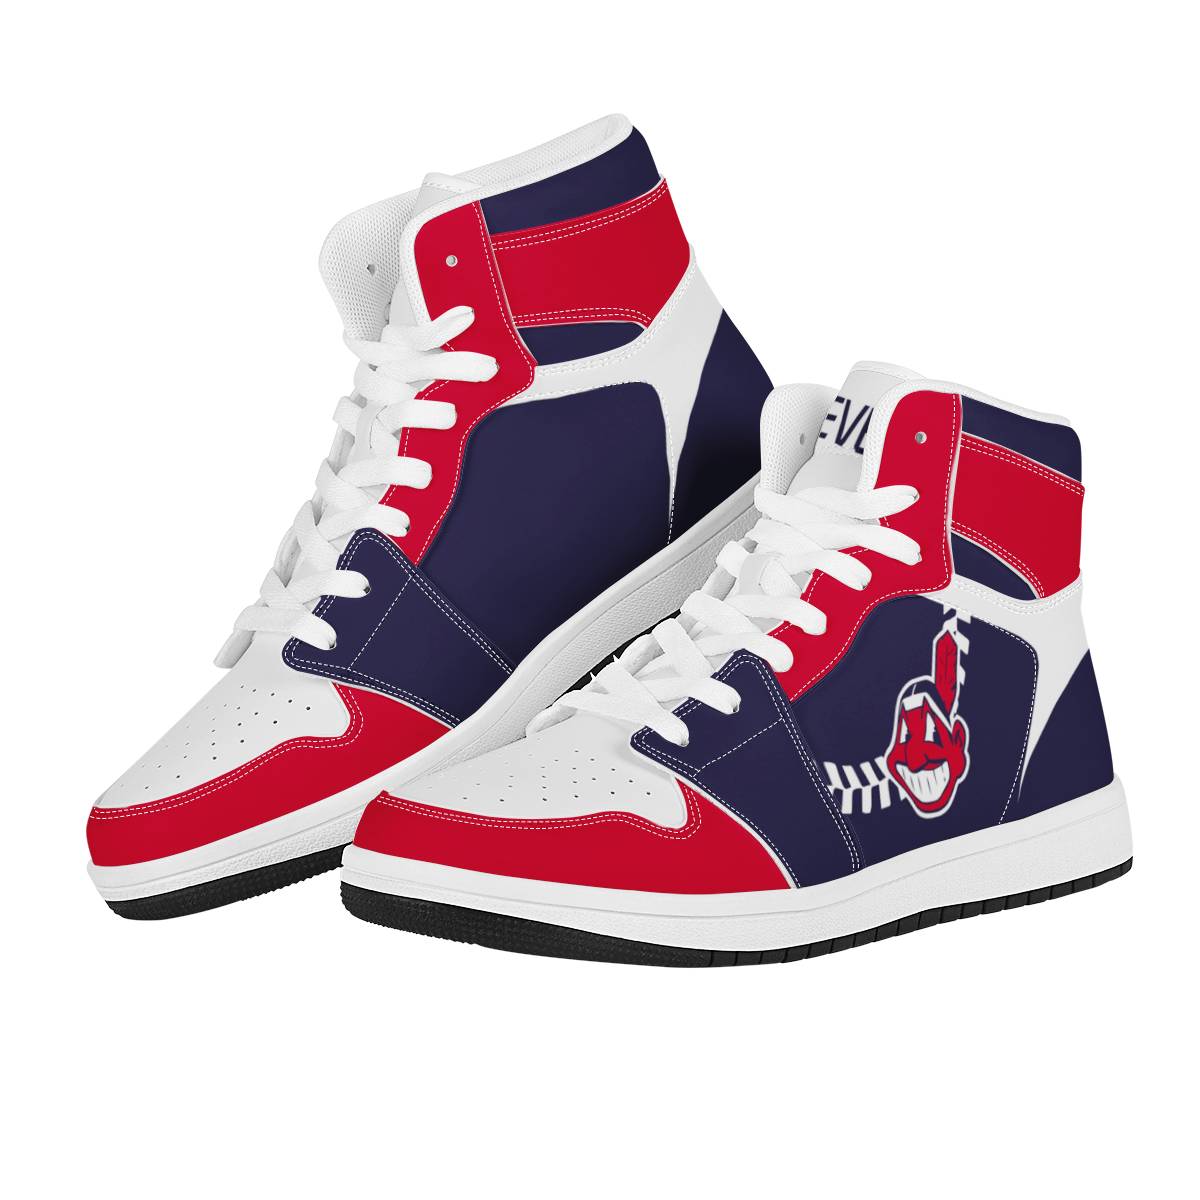 Women's Cleveland Indians High Top Leather AJ1 Sneakers 002